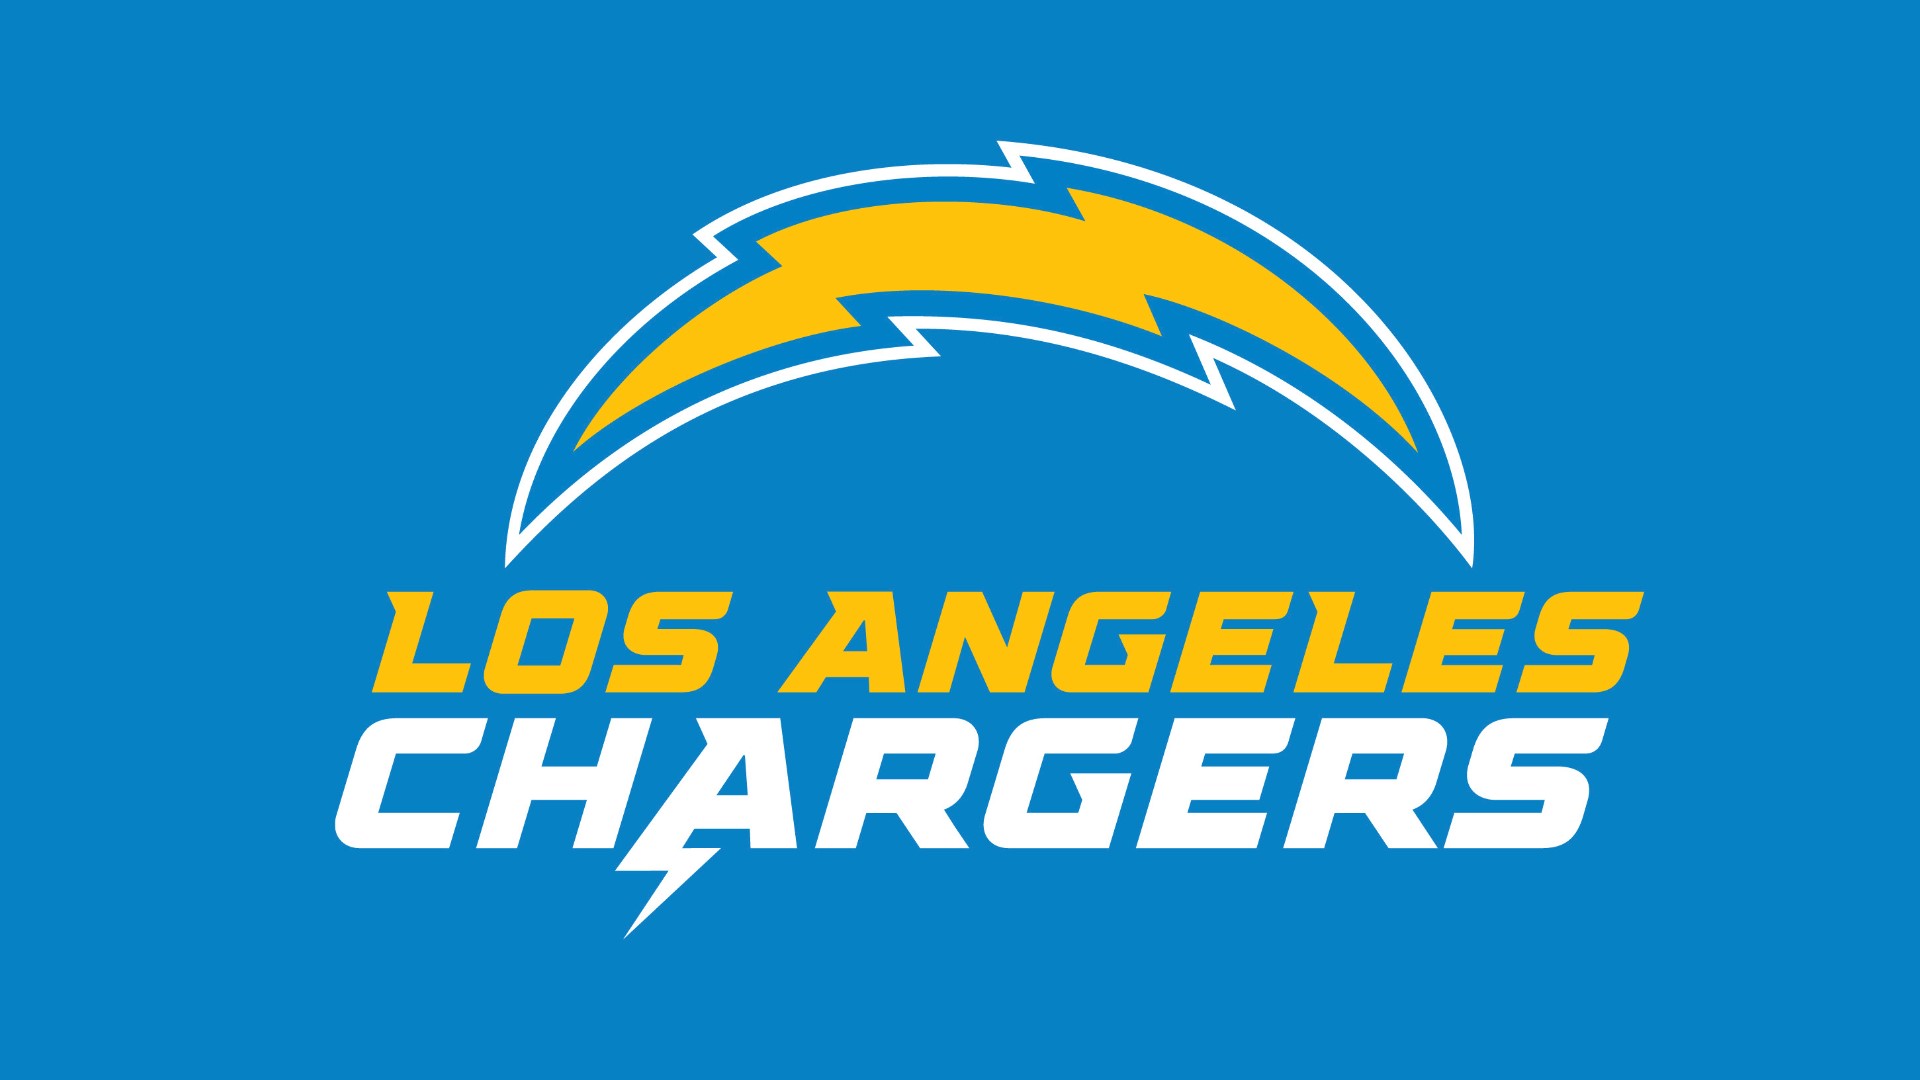 Los Angeles Chargers unveil new logo ahead of 2020 NFL season | 9news.com